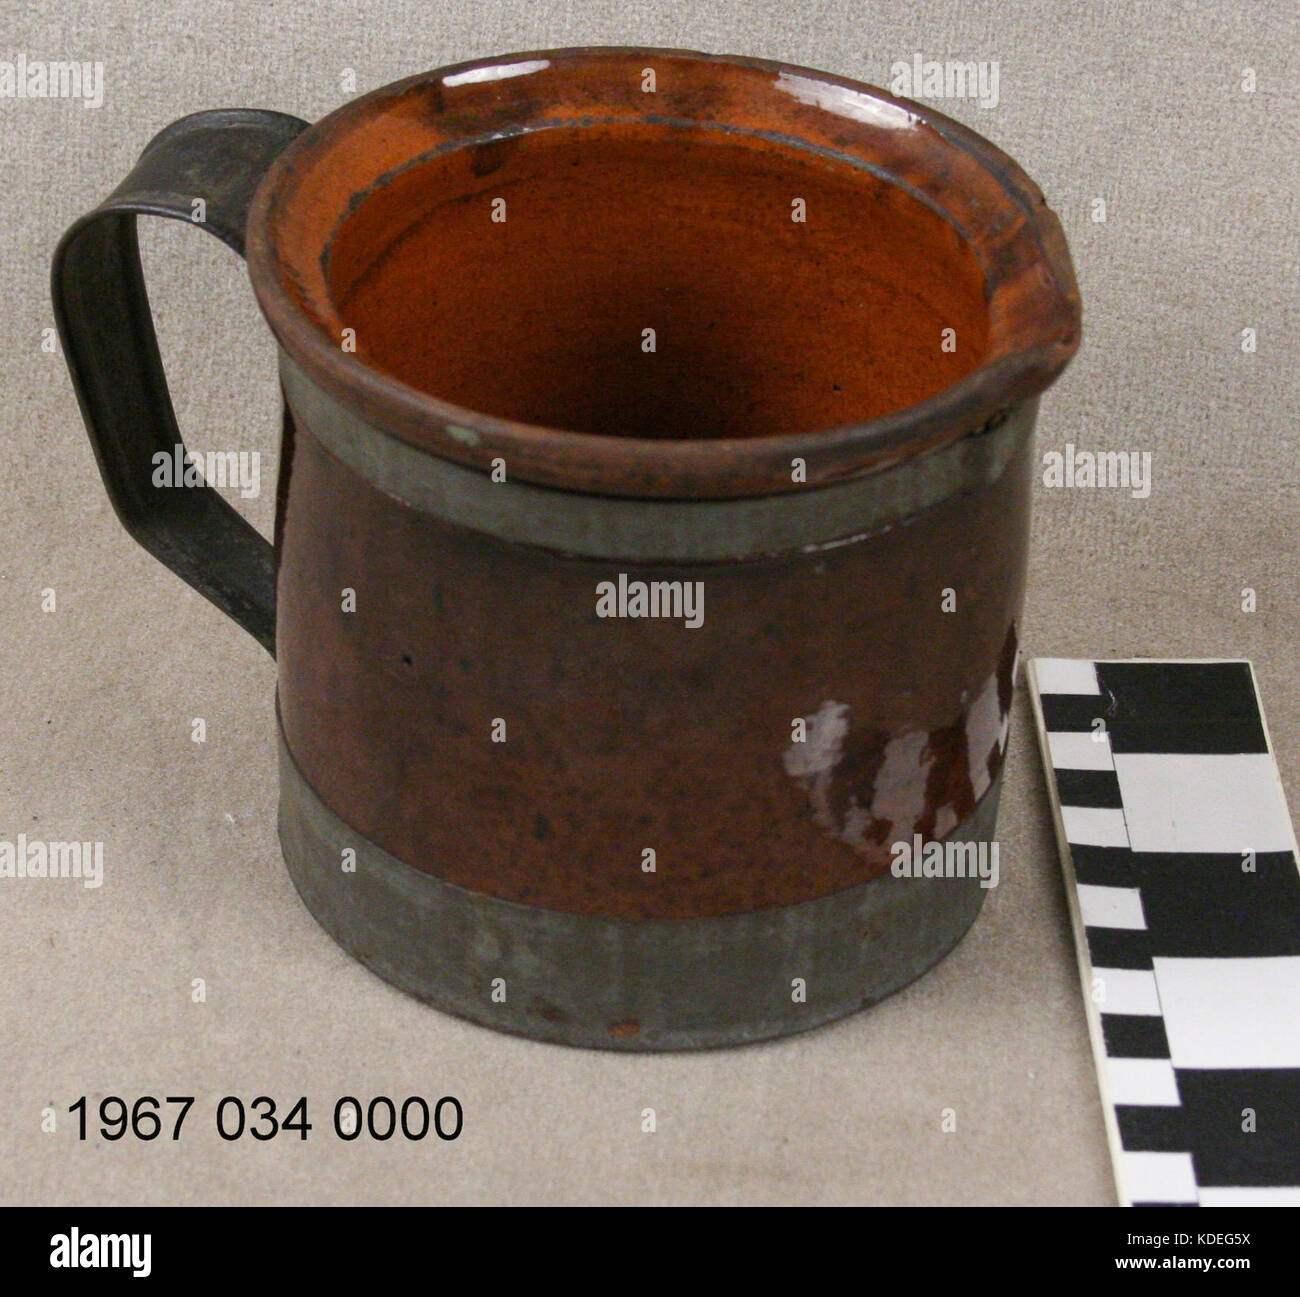 Pottery Cooking Vessel Patented by Fridolin Schifferle, St. Louis Stock Photo